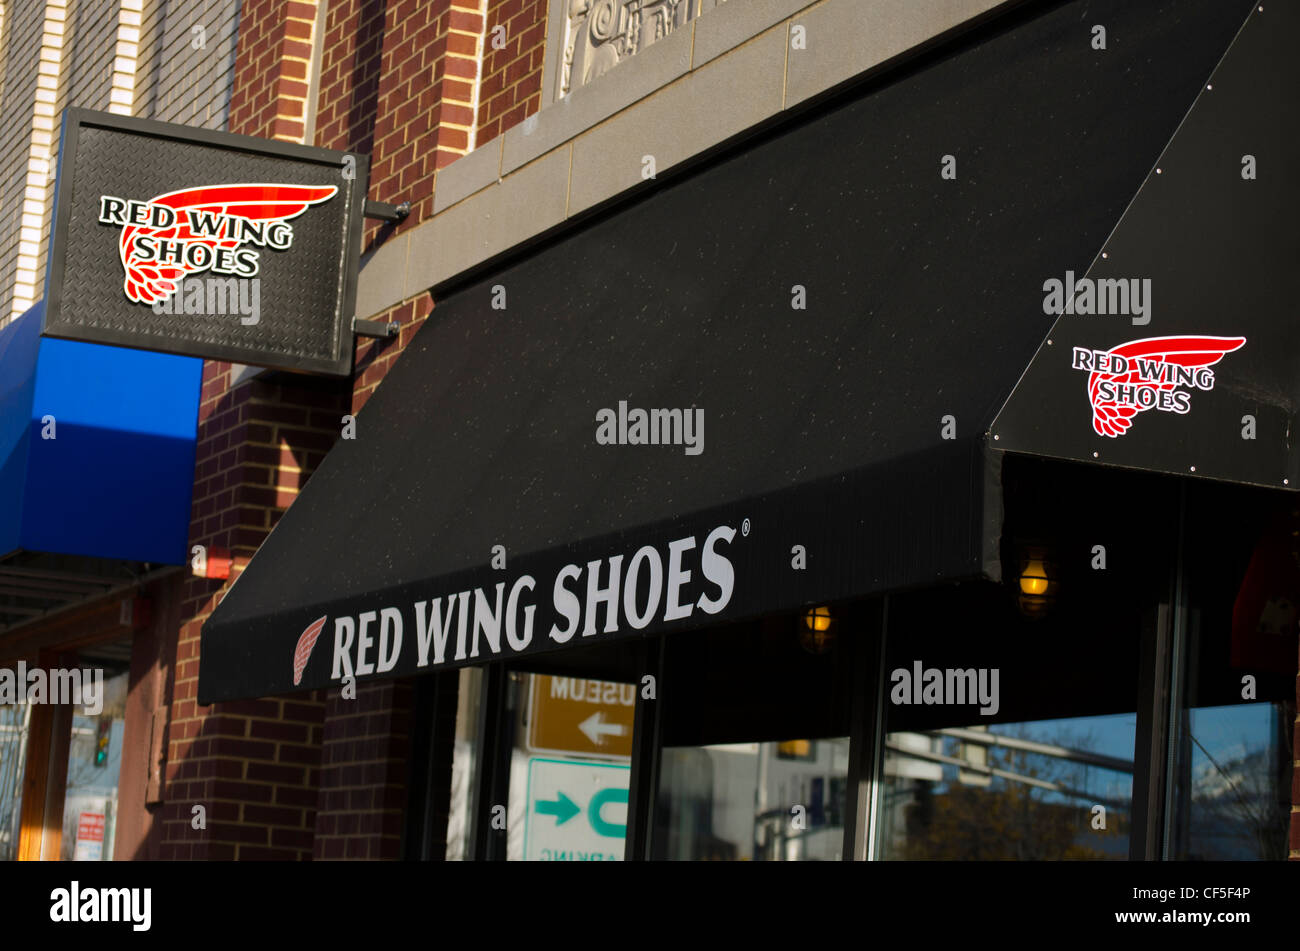 Red Wing Shoes, famous shoemaker, in Red Wing, Minnesota. Stock Photo